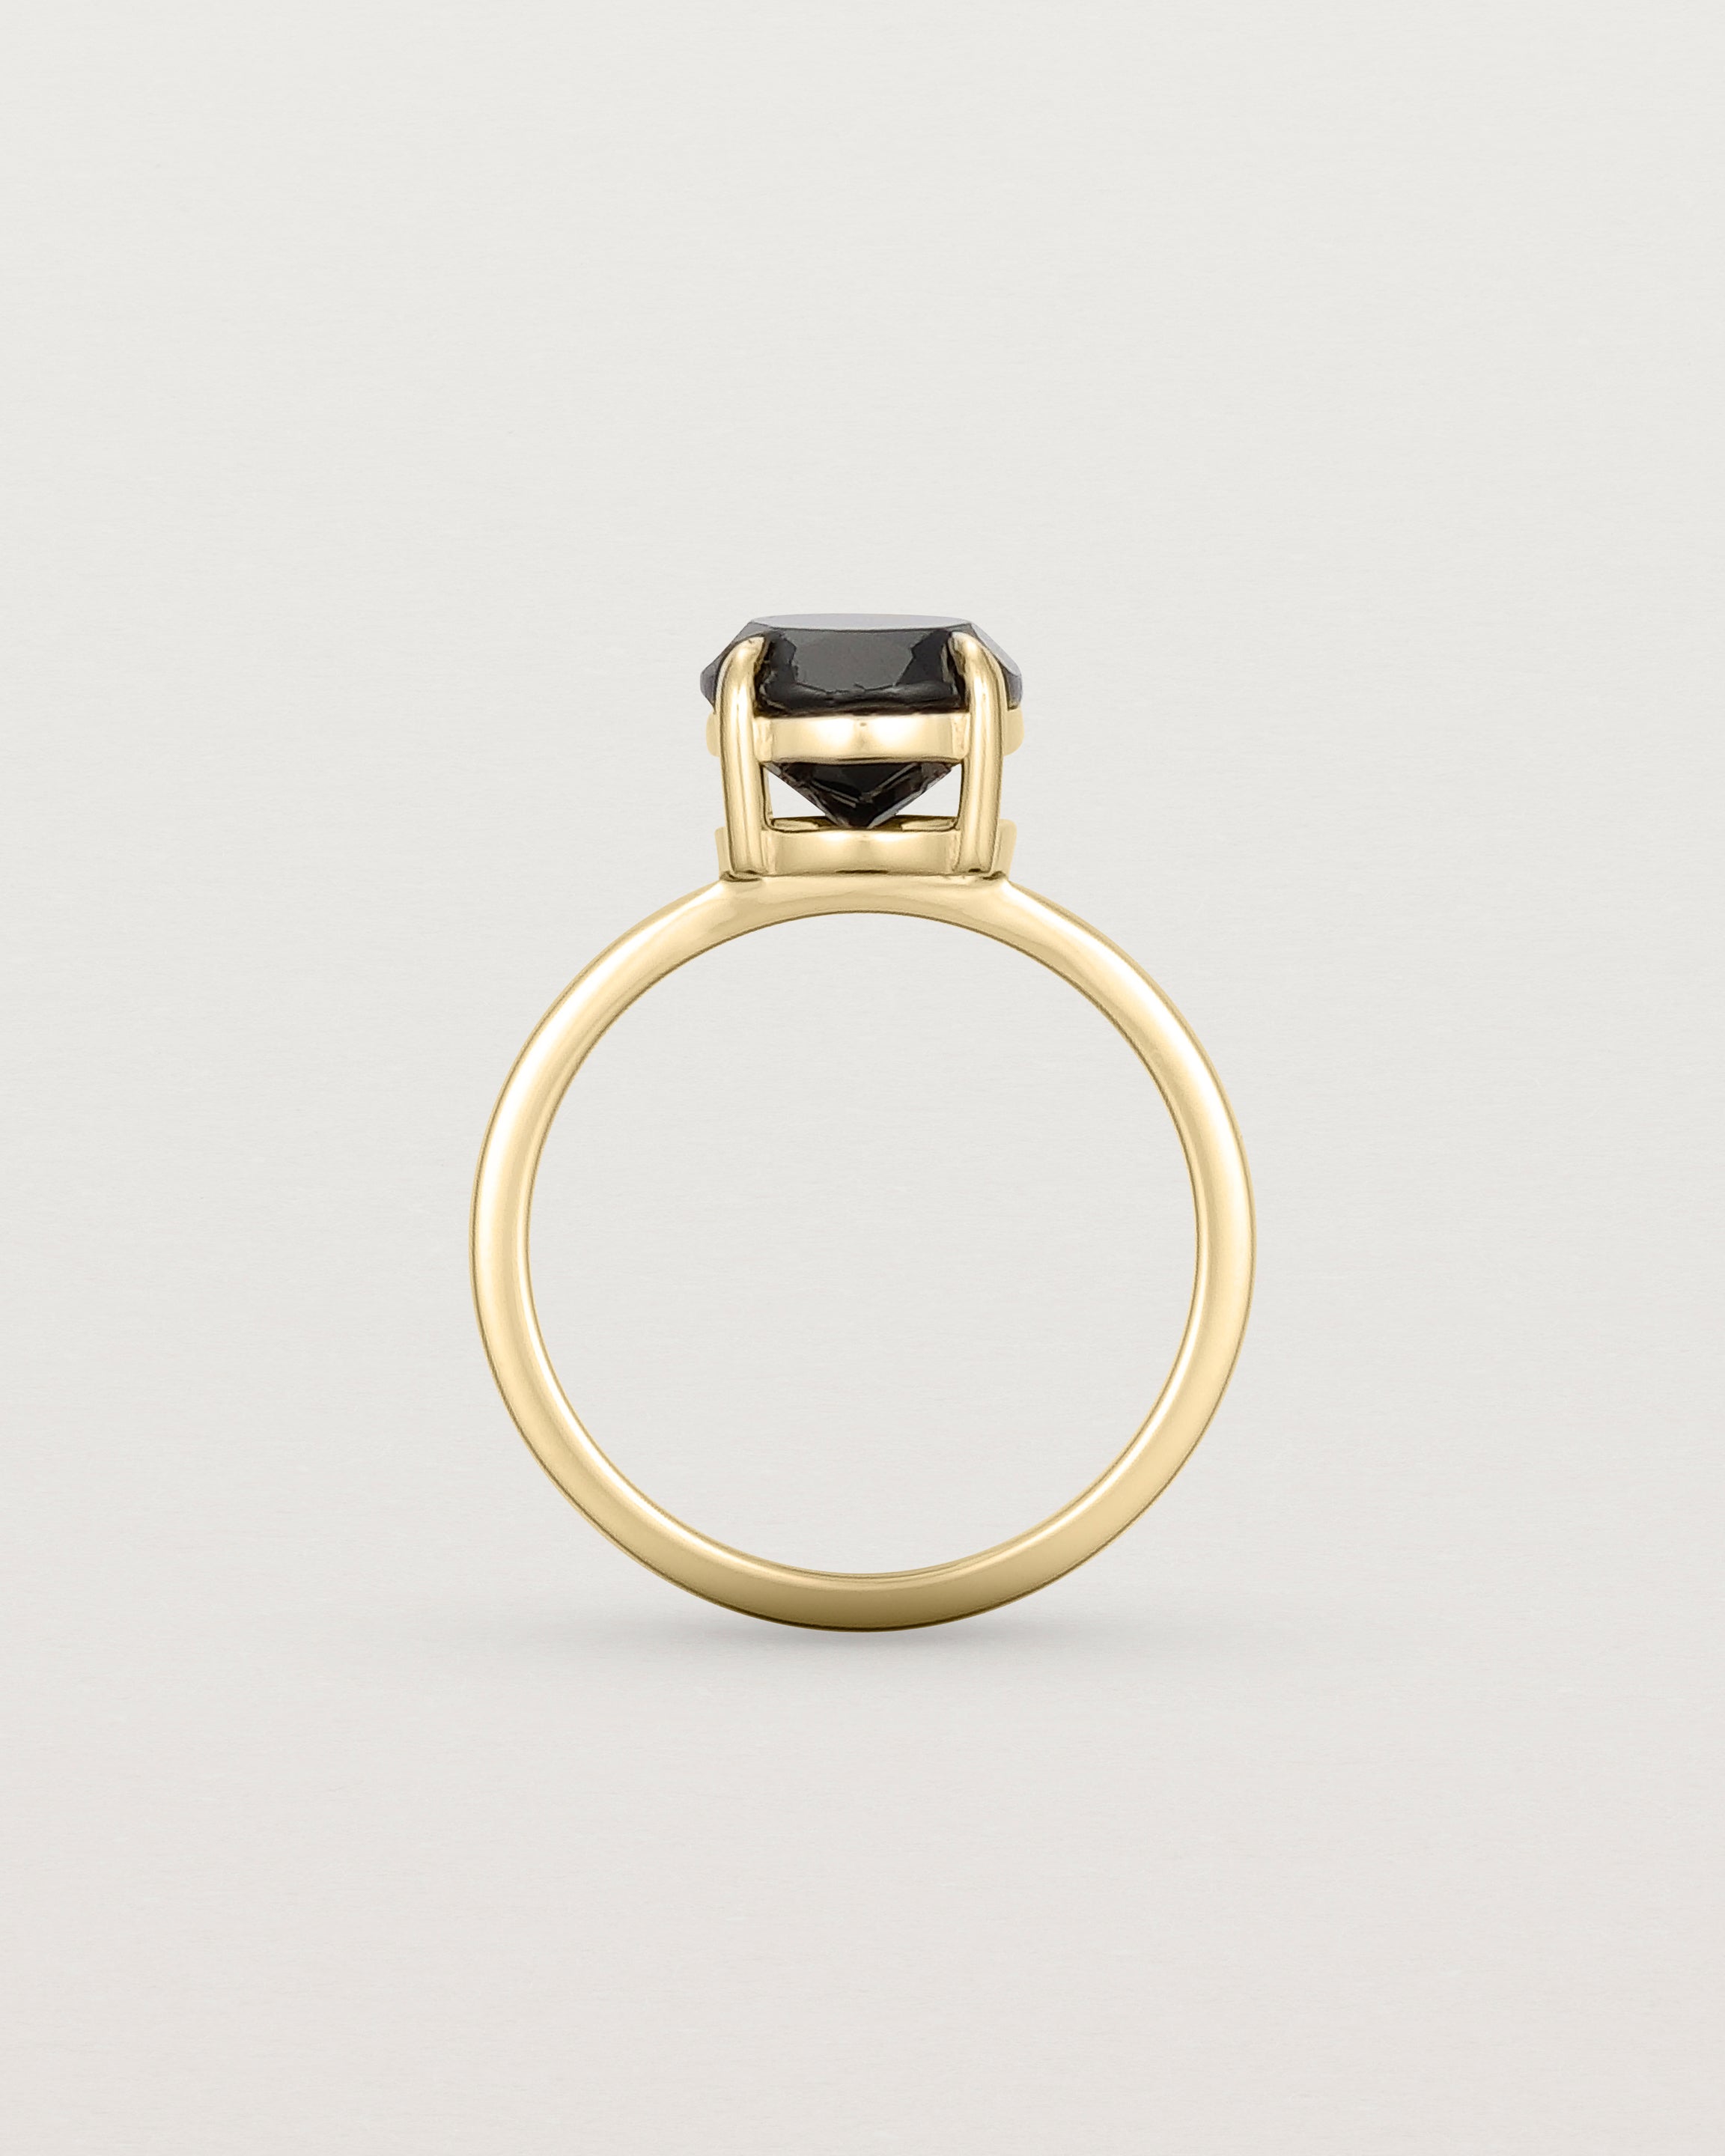 Standing view of the Una Round Solitaire | Black Spinel | Yellow Gold